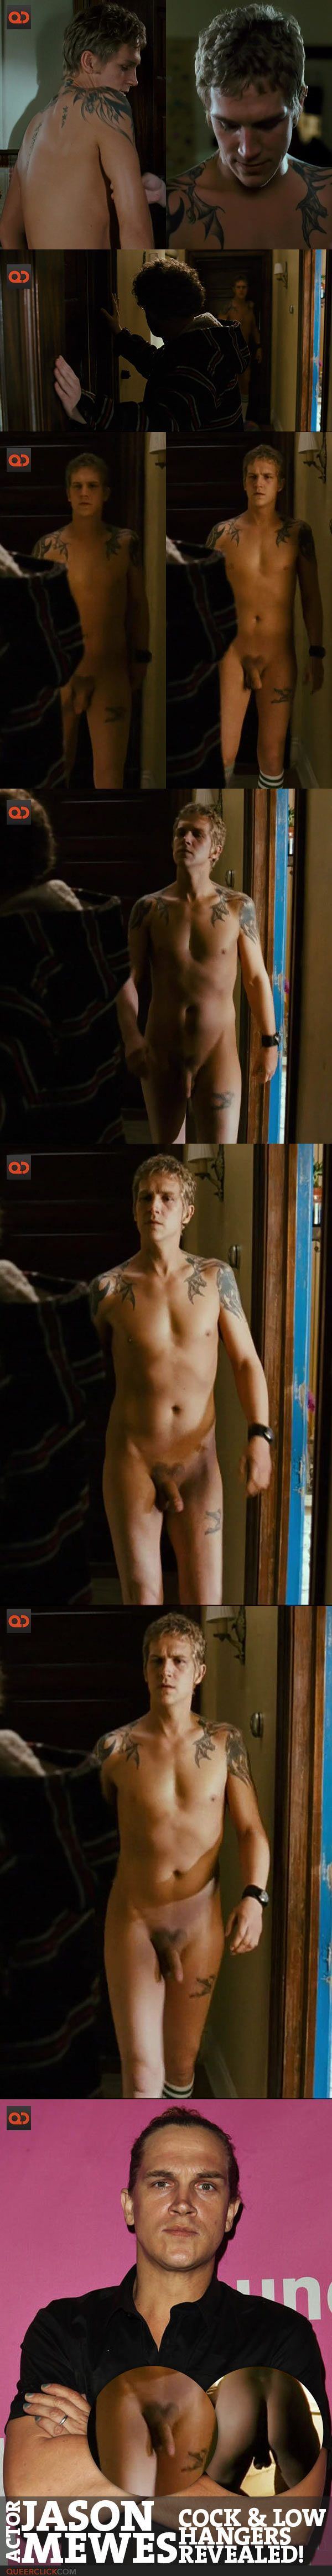 Jason mewes naked cock